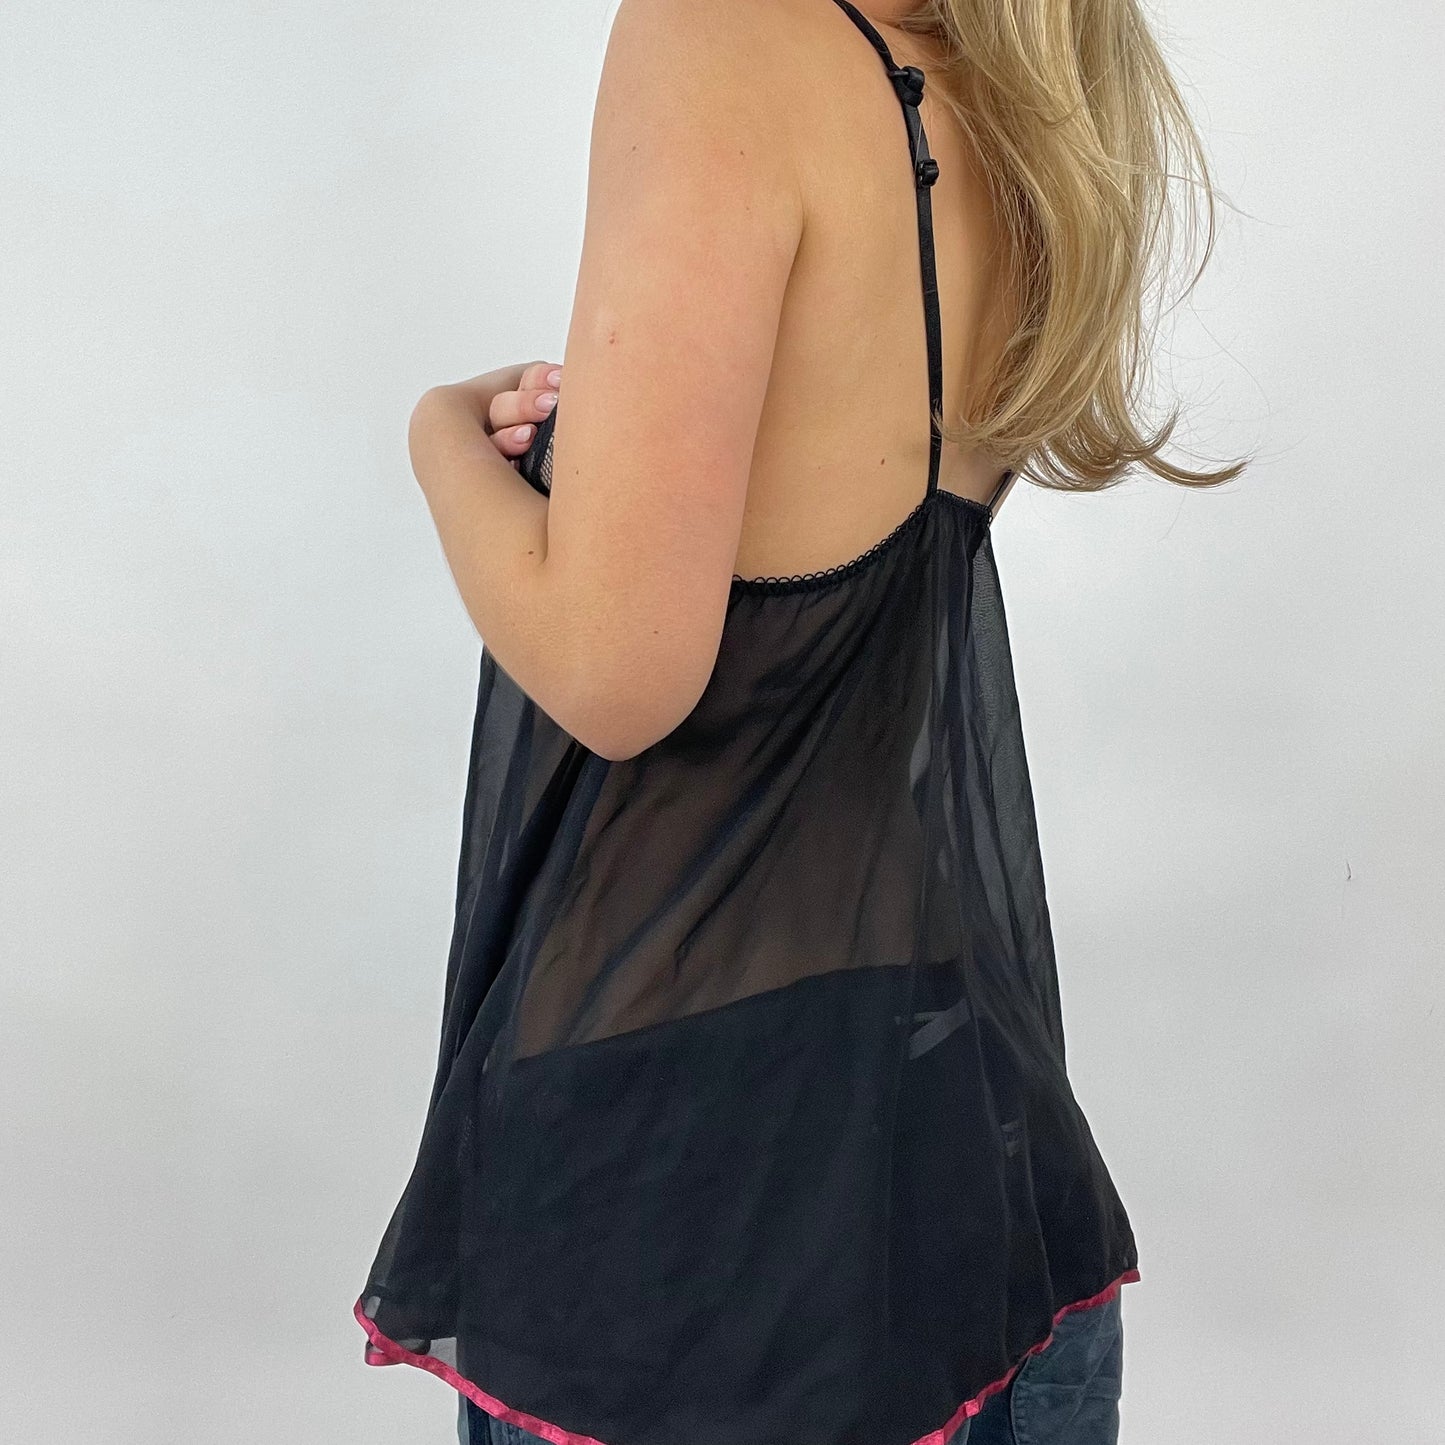 GIRL CORE DROP | small black lingerie style top with lace bust and pink ribbon